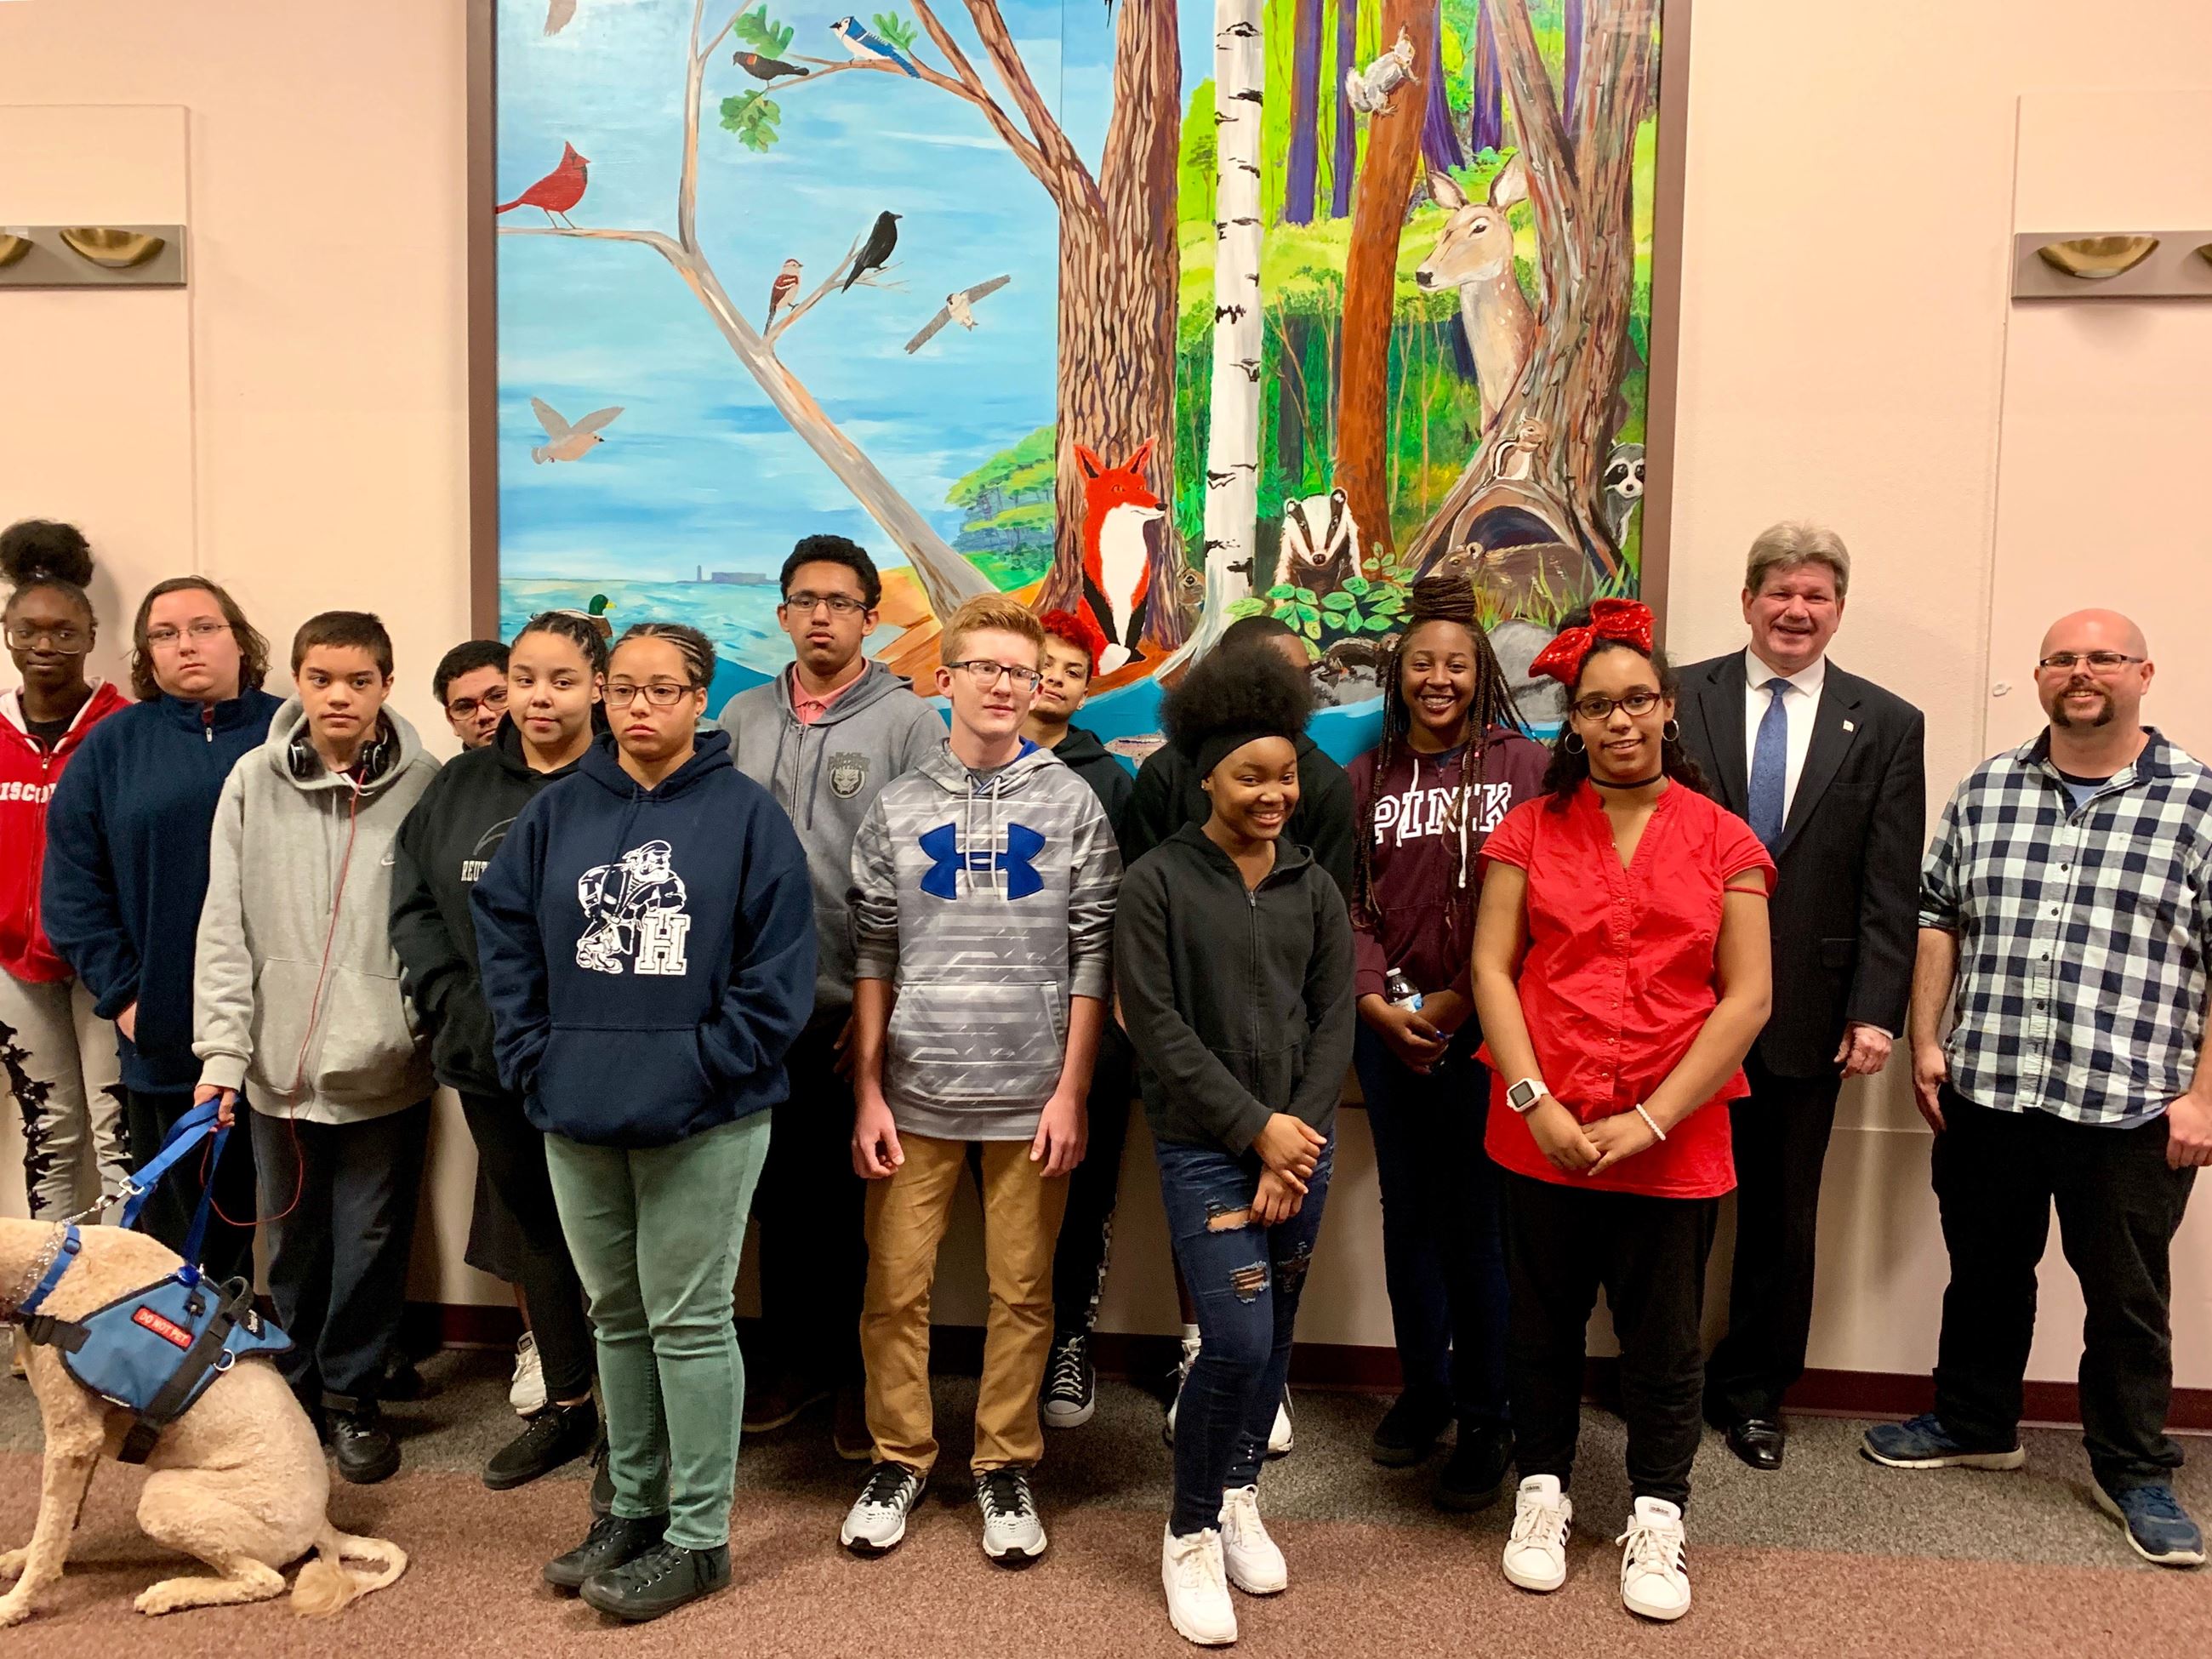 Group photo at 2019 Summer Youth Employment mural dedication